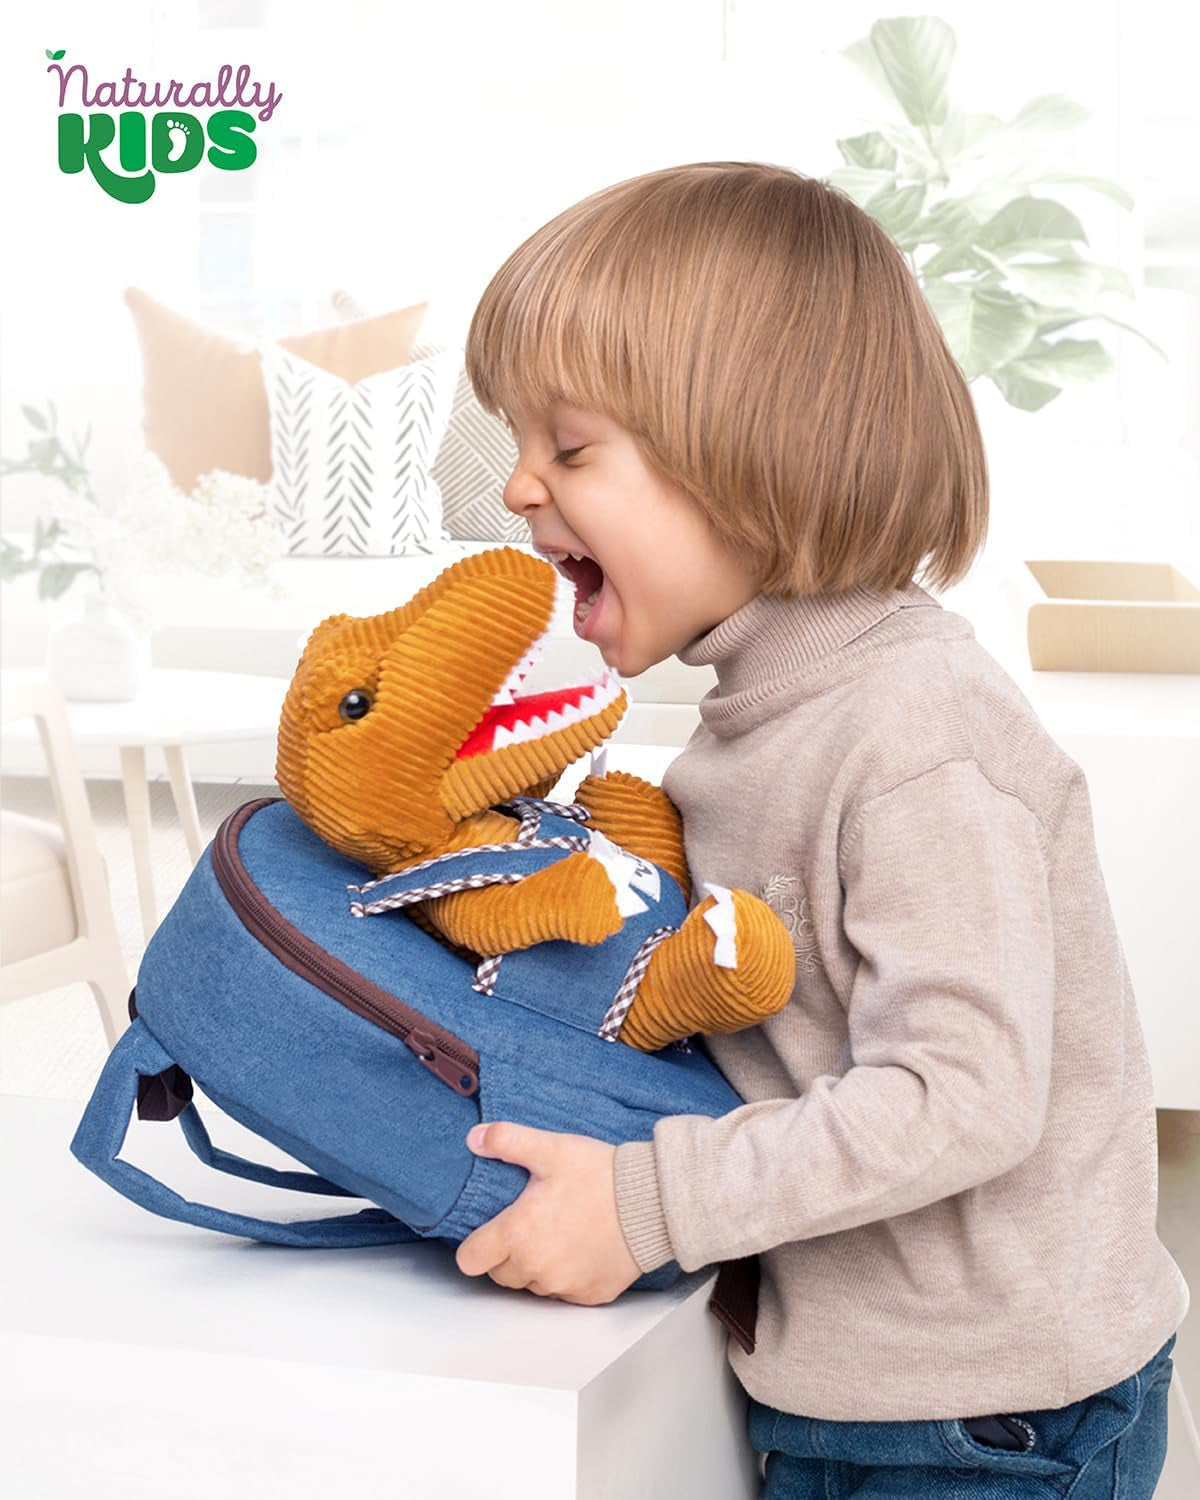 Additional Toy Backpack - Dinosaur Toys for Kids 3-5 - Dinosaur Stuffed Animals - Toys for 3 4 5 6 Year Old Boys Girls Birthday Gifts - Green Dinosaur Plush Triceratops Toy